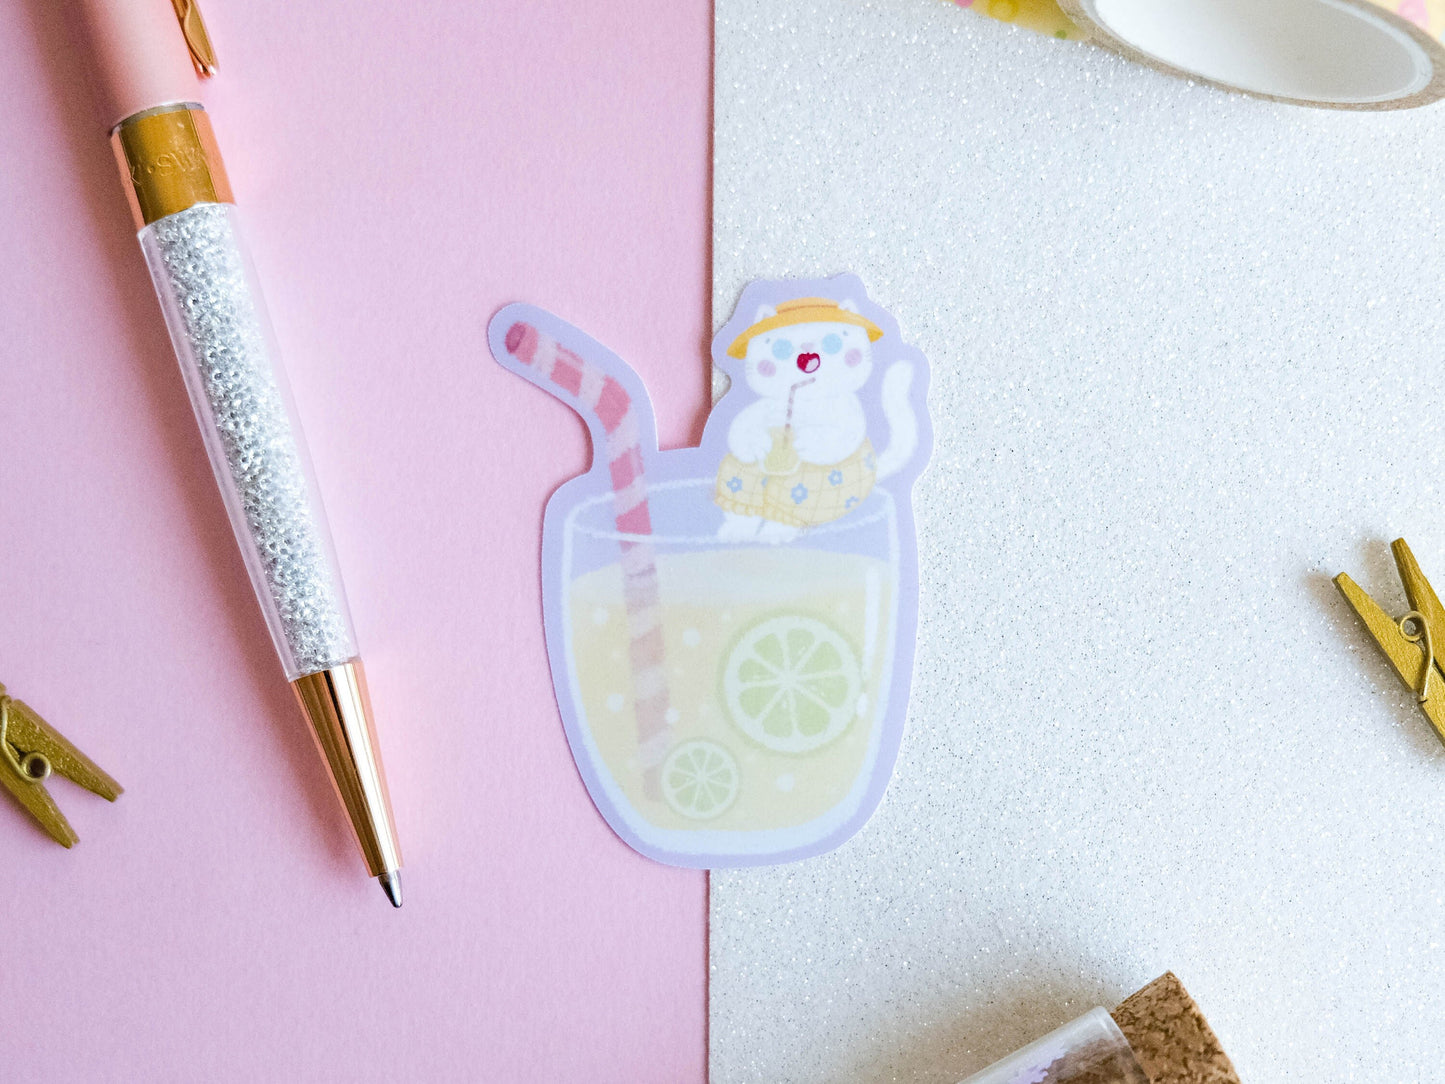 Sticker water resistant White Cat Lemonade ready for Summer and Beach to decorate bullet journal and phone case